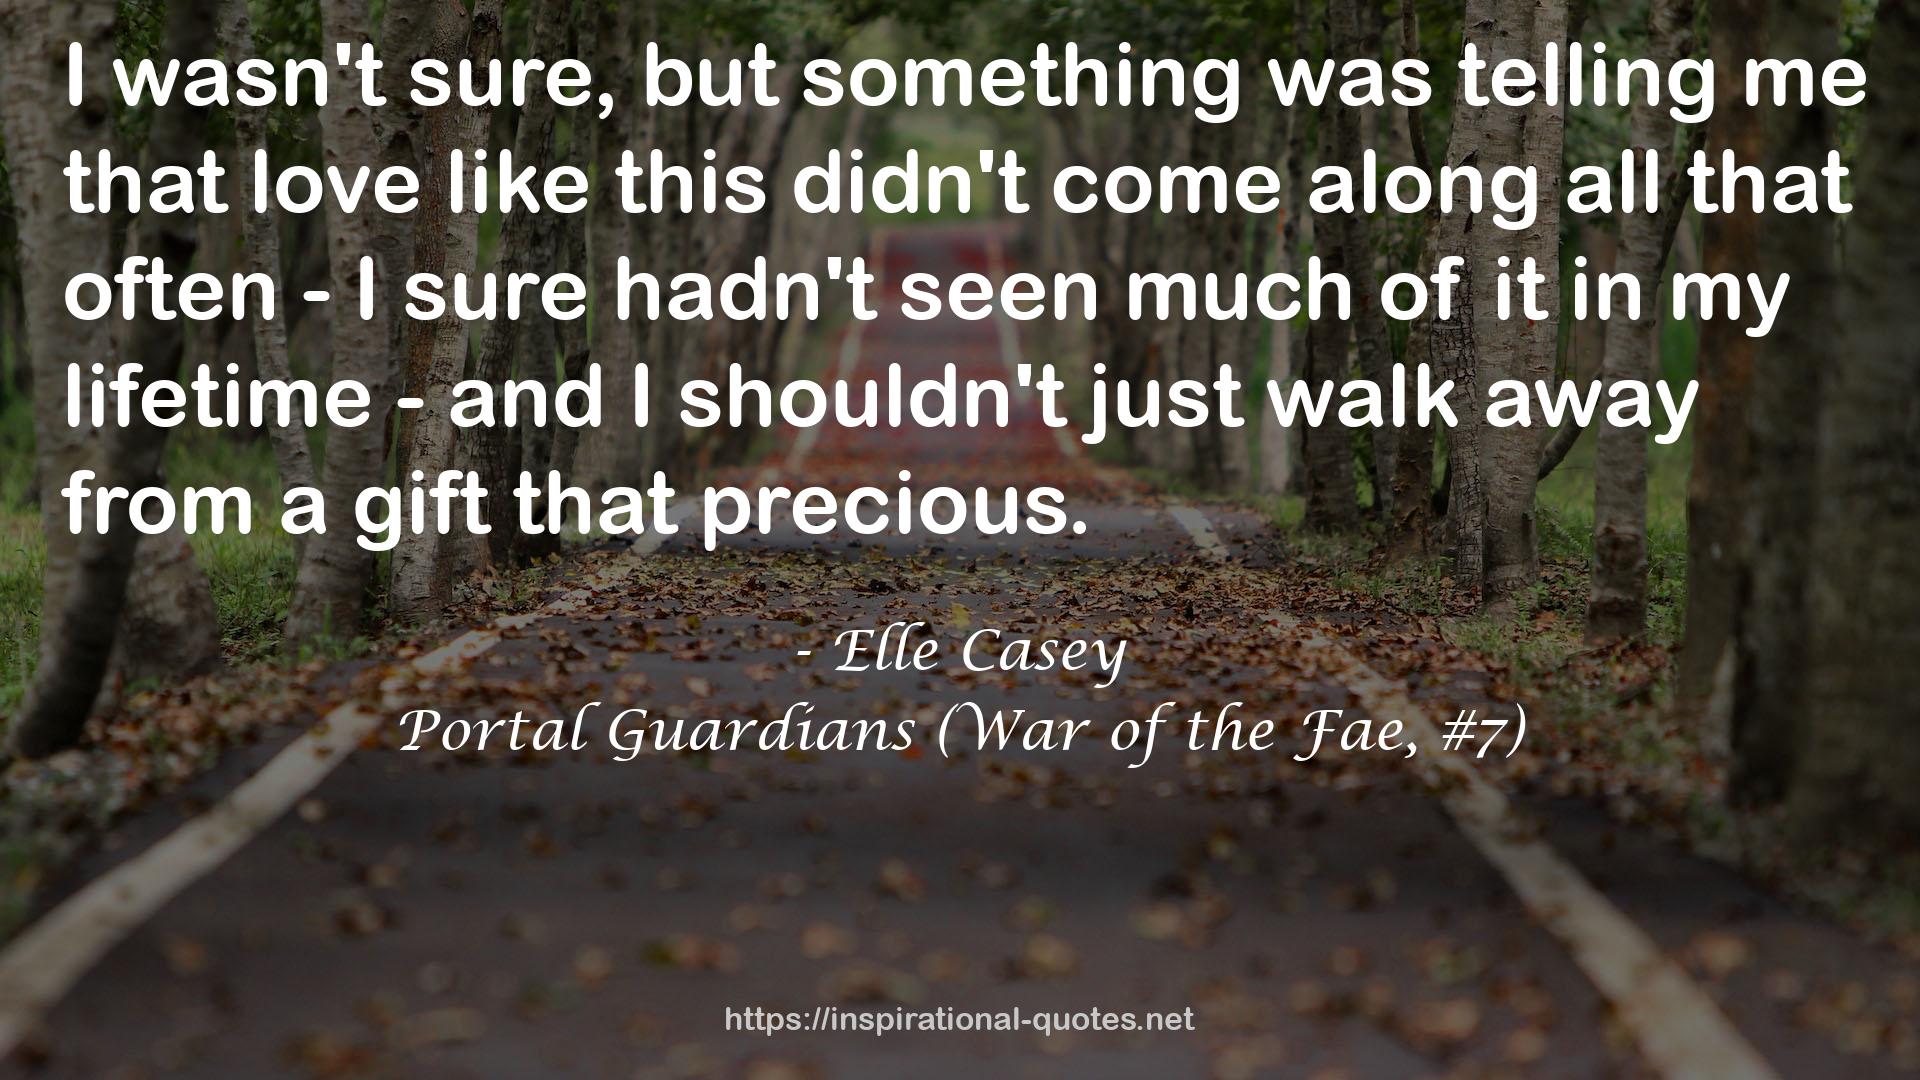 Portal Guardians (War of the Fae, #7) QUOTES